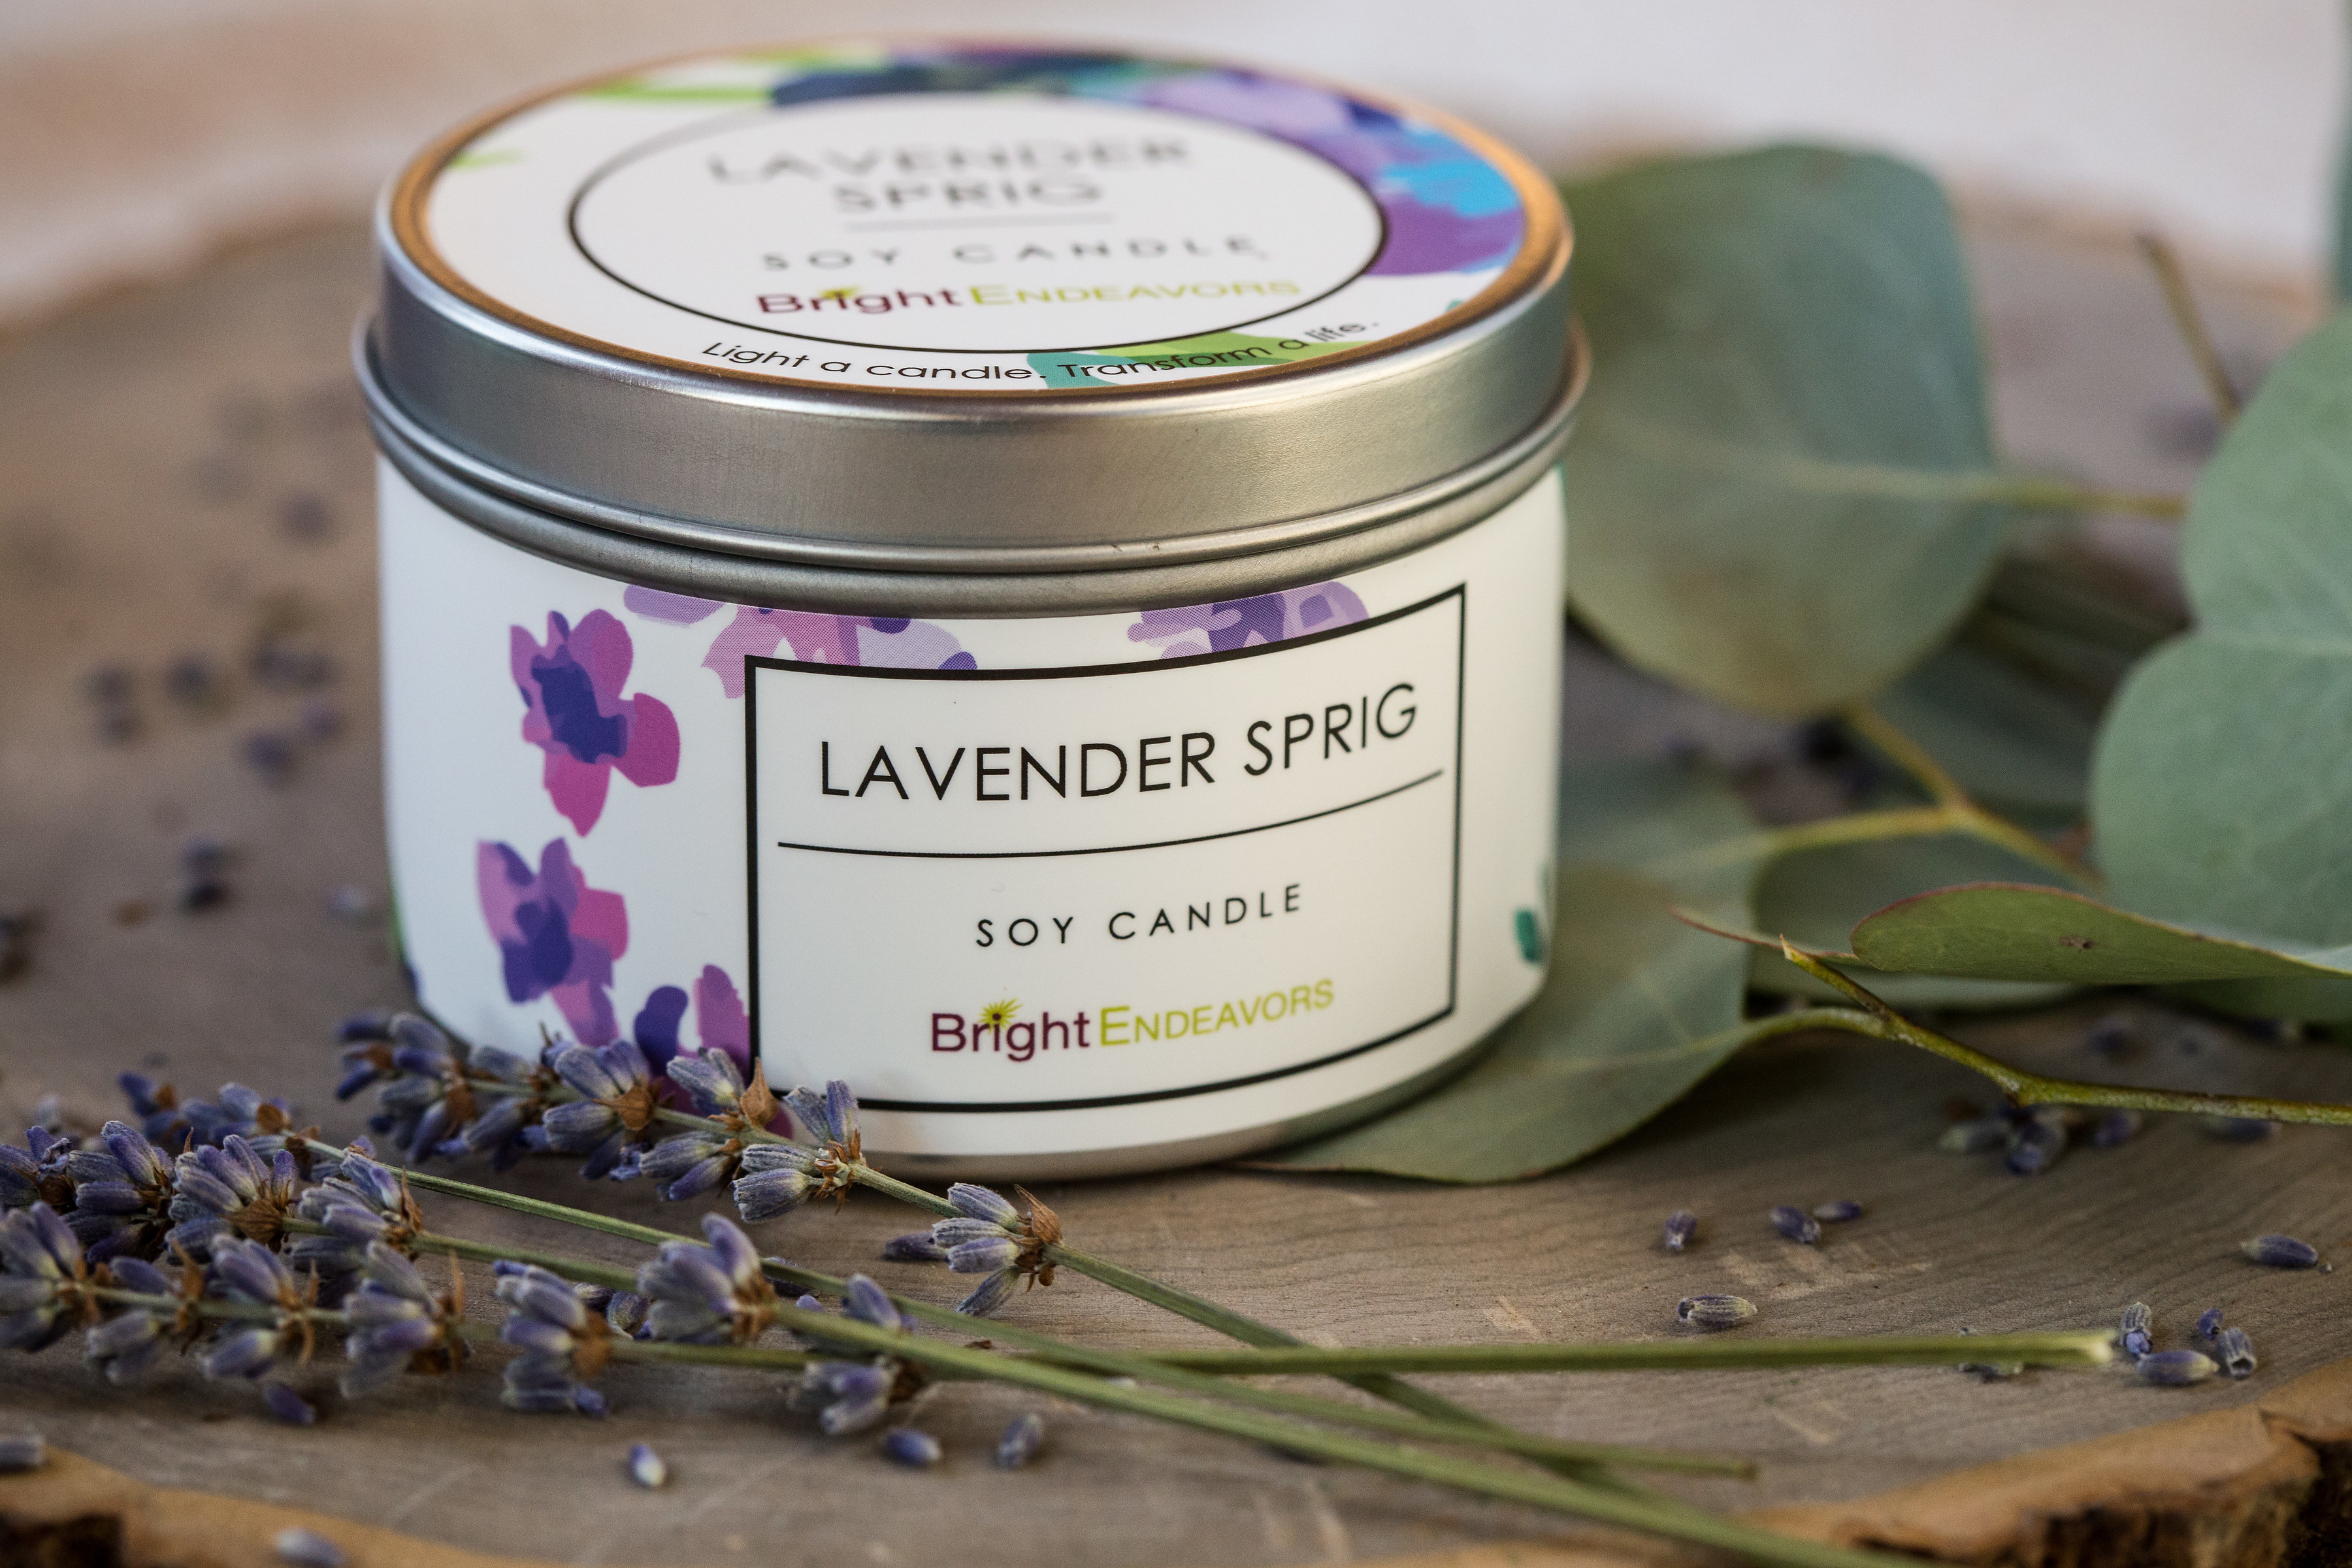 10 Things to Treat Yourself to This Month - Bright Endeavors candle